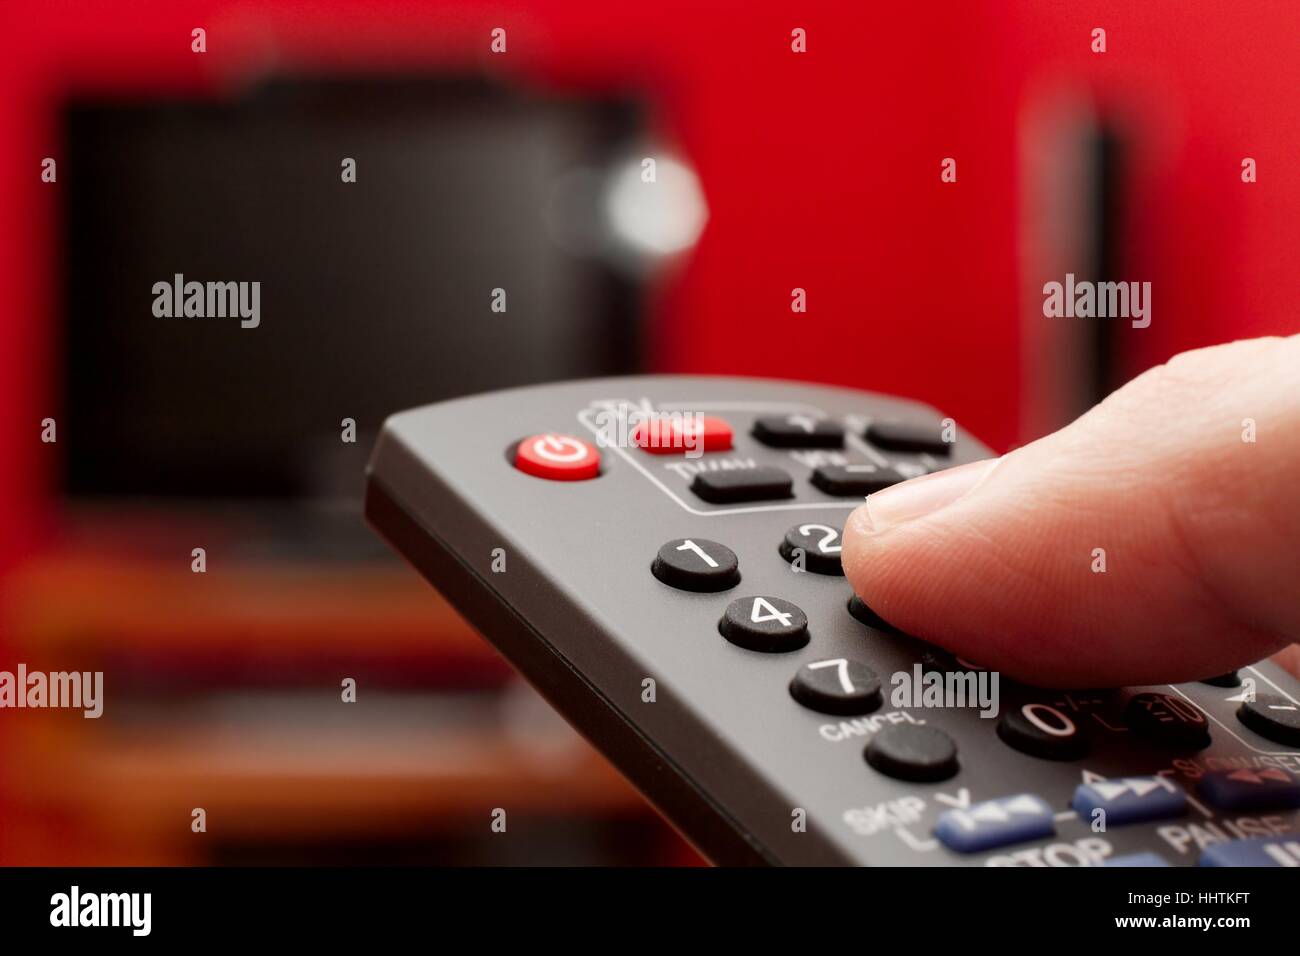 watch, remote, television, tv, televisions, video, control, set, remote Stock Photo